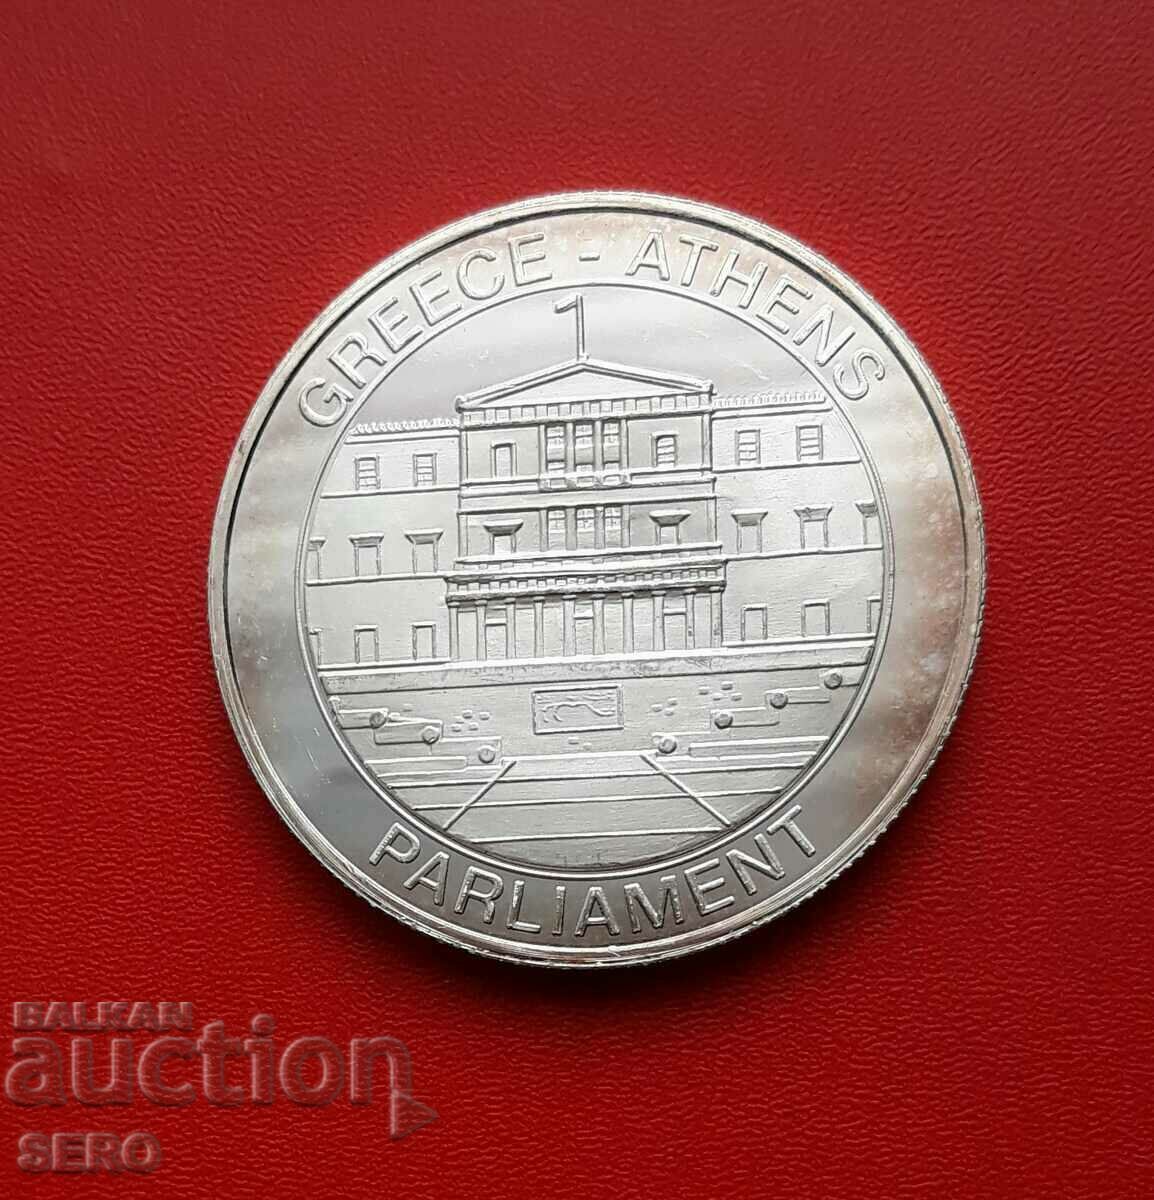 European Union-Medal-Capitals of Europe-Athens-Greece